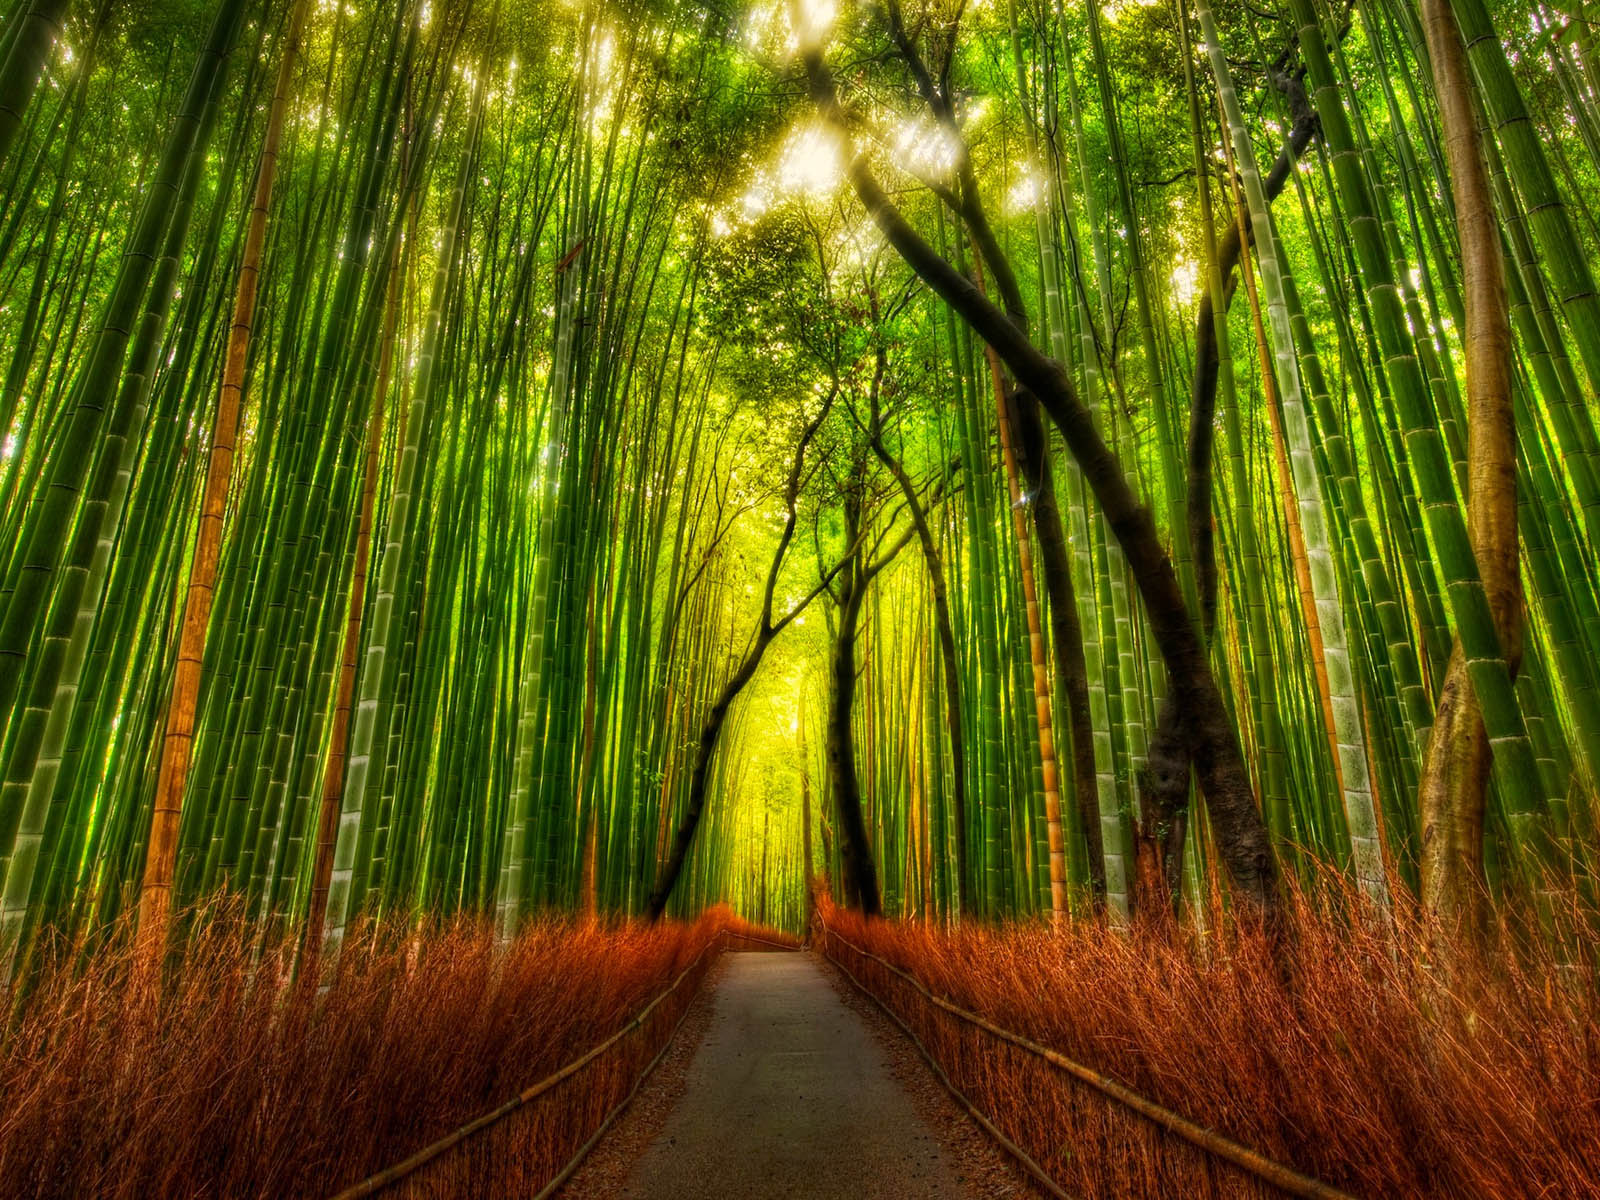 Free download the Bamboo Forest Wallpaper Bamboo Forest Desktop Wallpaper Bamboo [1600x1200] for your Desktop, Mobile & Tablet. Explore Bamboo Forest Wallpaper. Bamboo Wallpaper Wall Coverings, Bamboo Forest Japan